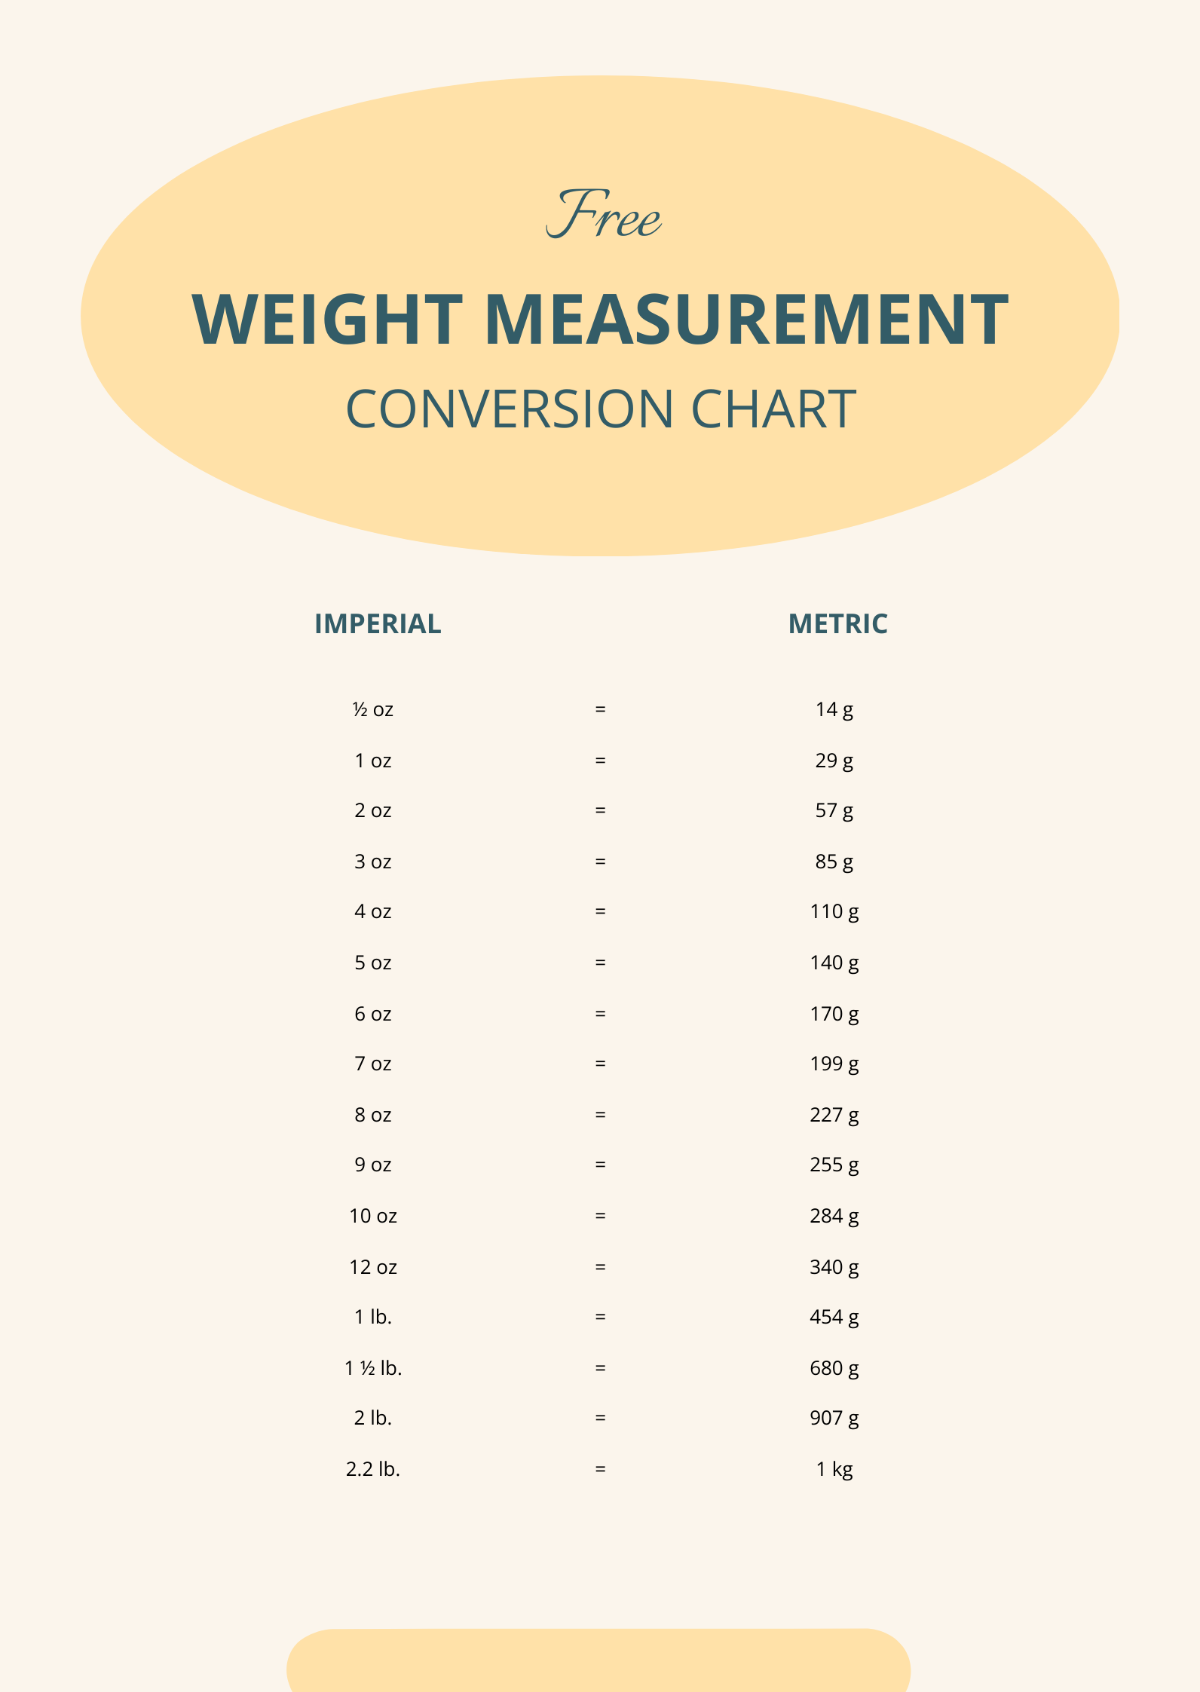 Weight Measurement Conversion Chart Template